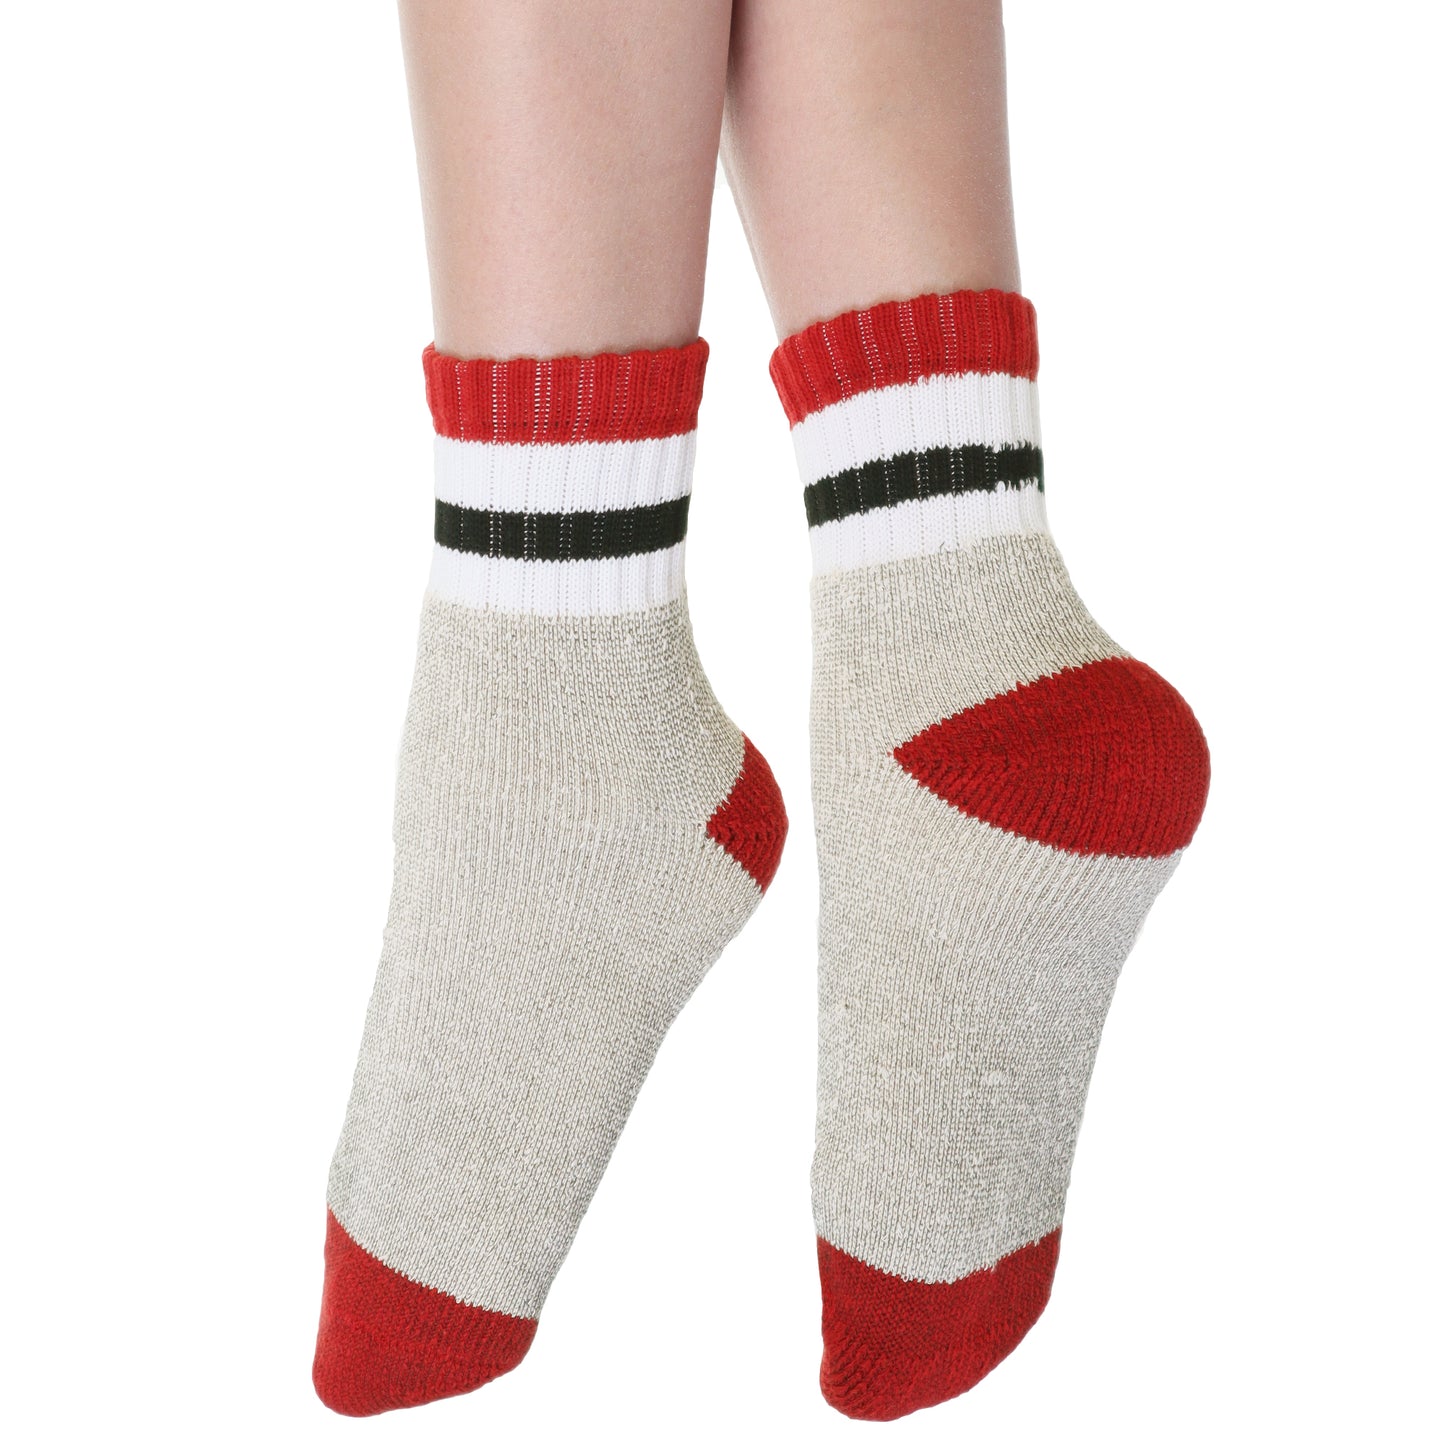 Angelina Unisex Quarter Socks with Striped Pattern Cuff (3-Pairs), #2563